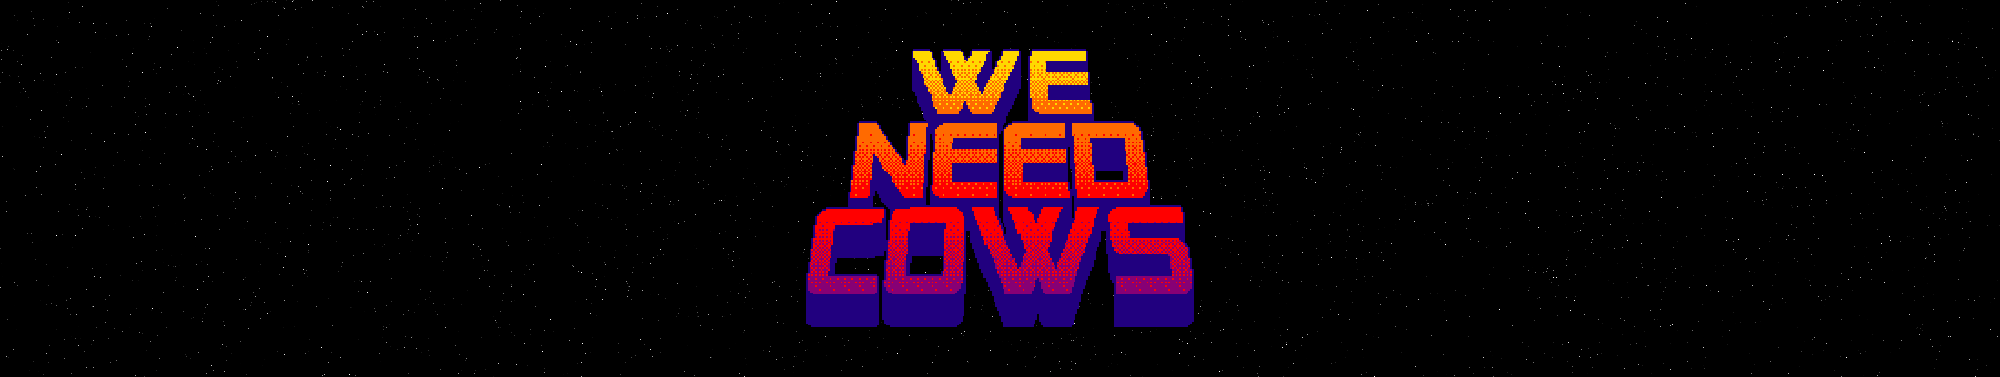 We need COWS!